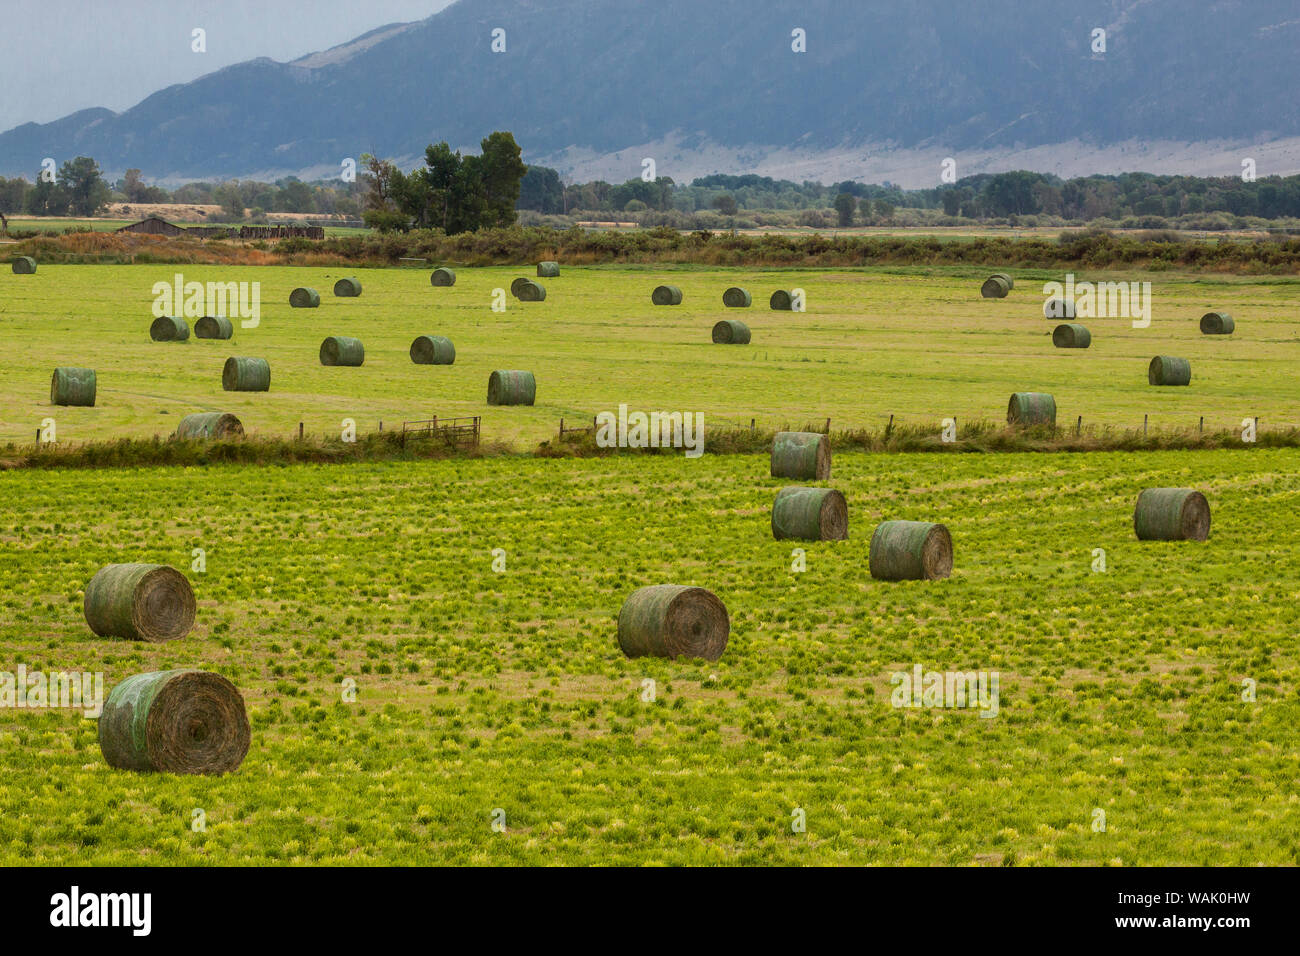 USA, Montana. Bales, or Rounds, of hay in a field that has just been harvested. Stock Photo